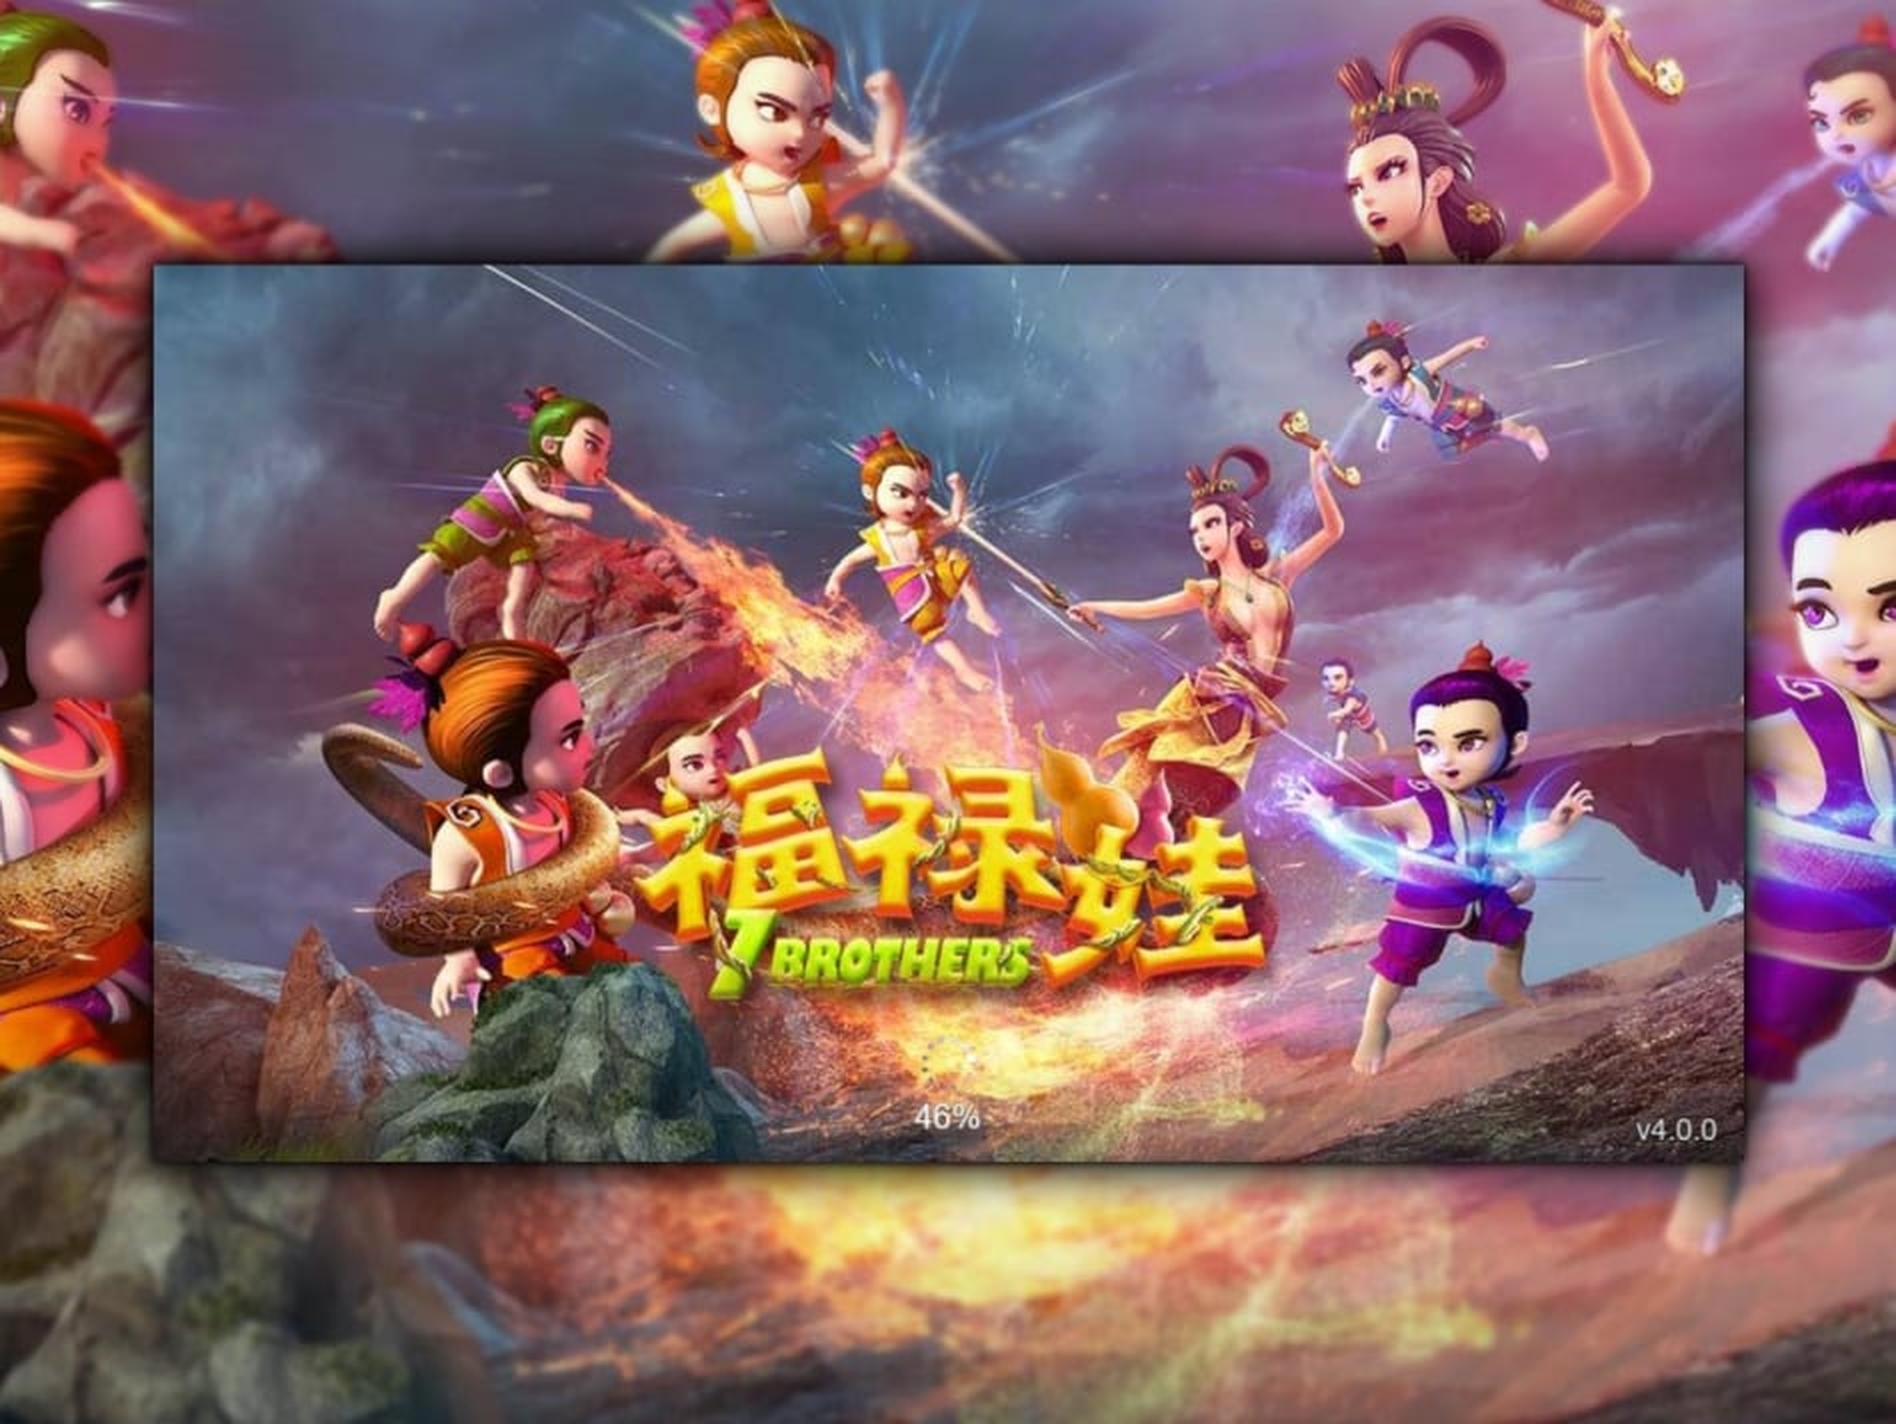 The 7 Brothers Online Slot Demo Game by Gameplay Interactive